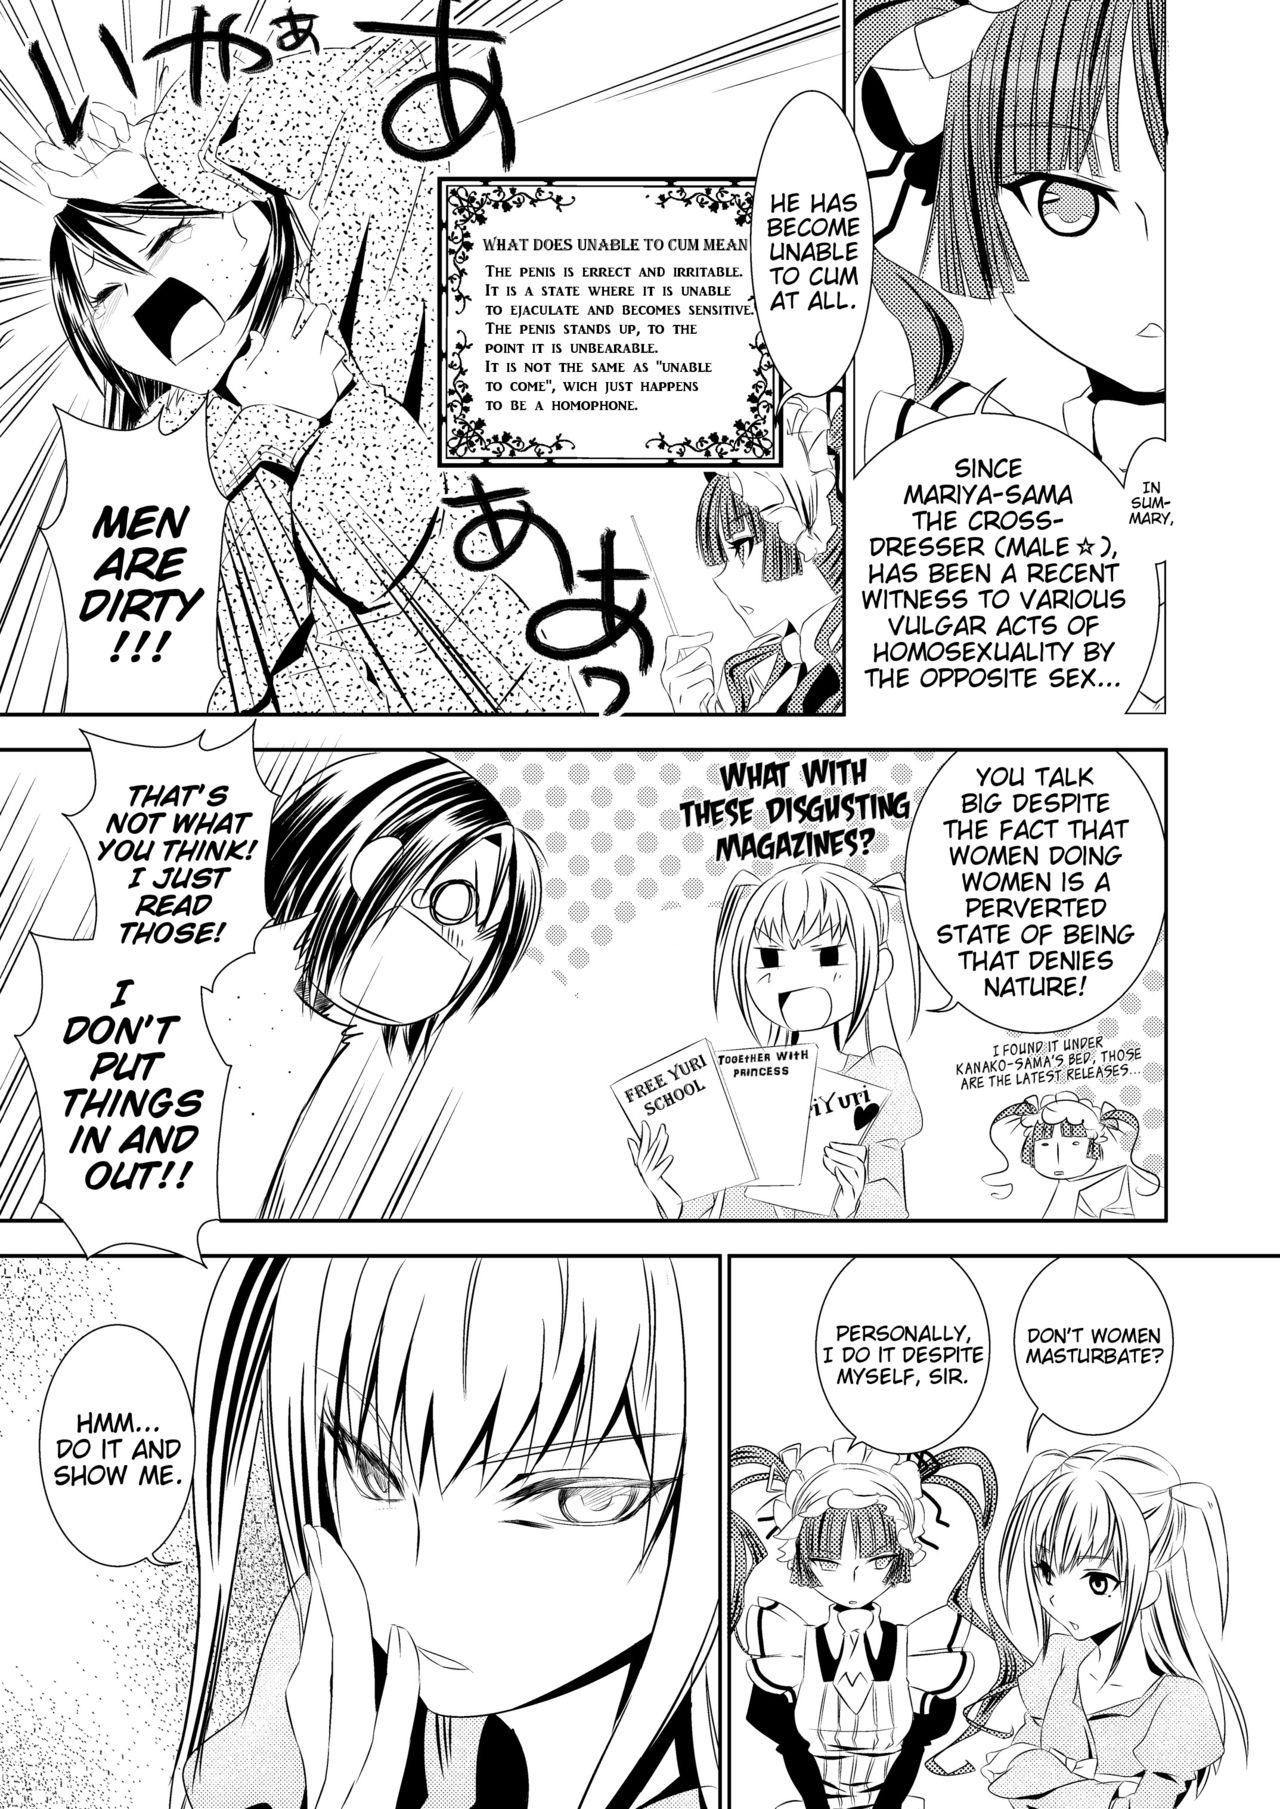 Reversecowgirl Otome no Are mo Sando - Maria holic Gay Orgy - Page 7